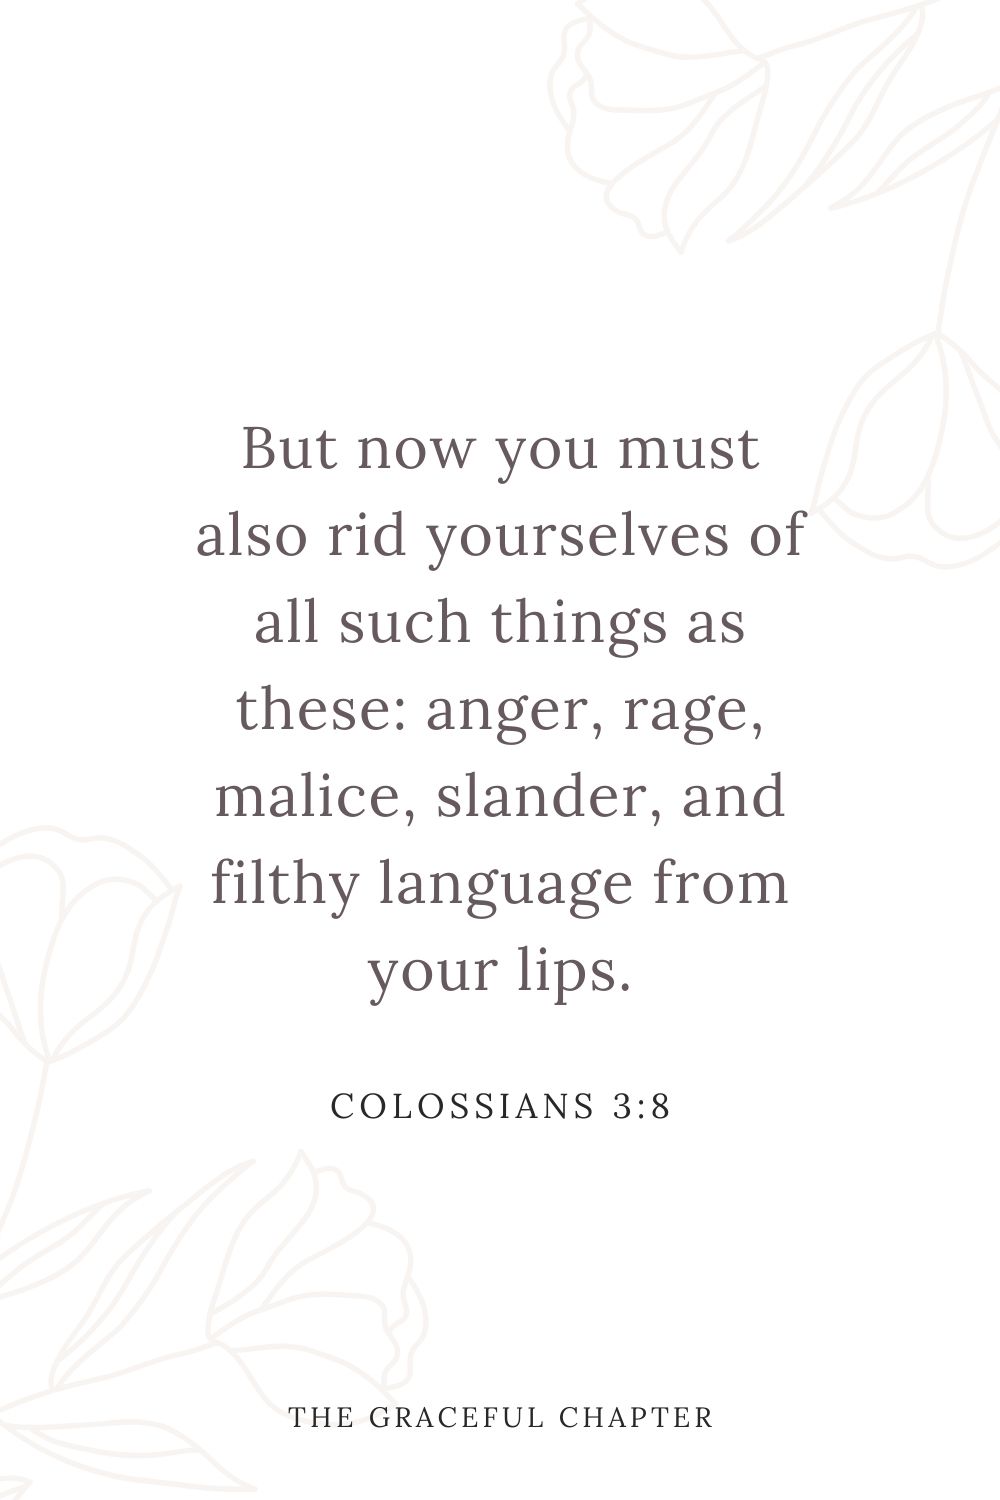 But now you must also rid yourselves of all such things as these: anger, rage, malice, slander, and filthy language from your lips. Colossians 3:8